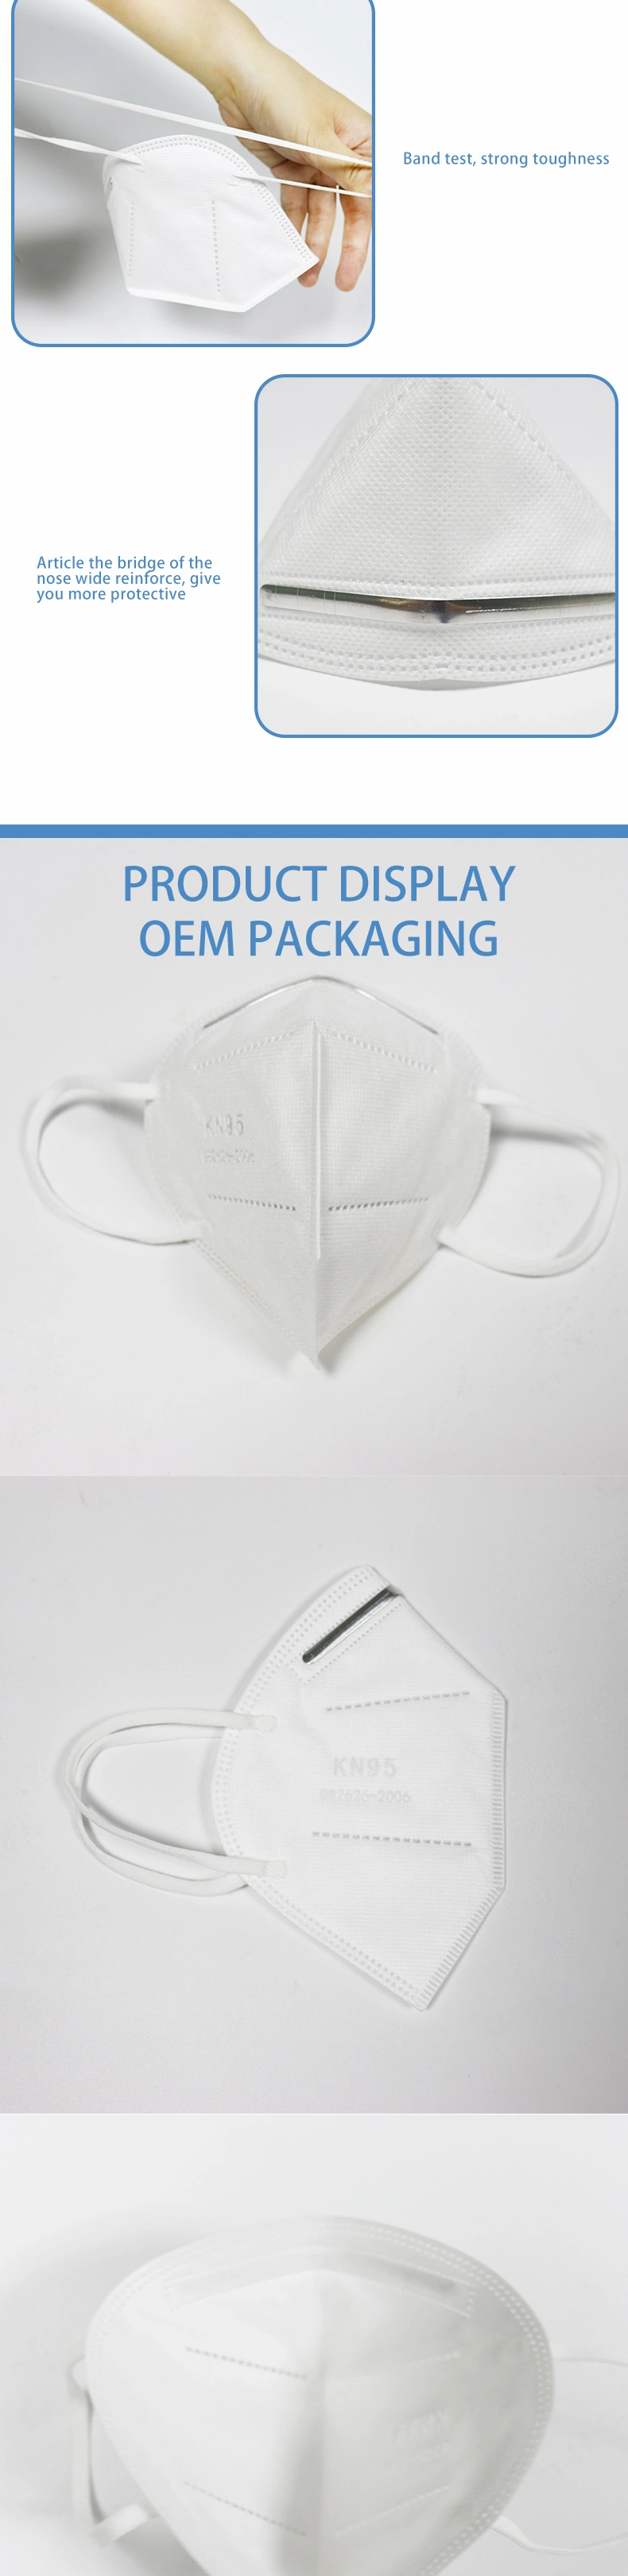 Reliable Kn 95 Mask Reusable Mask KN95 Face Masks Face Delivery Cheap Price